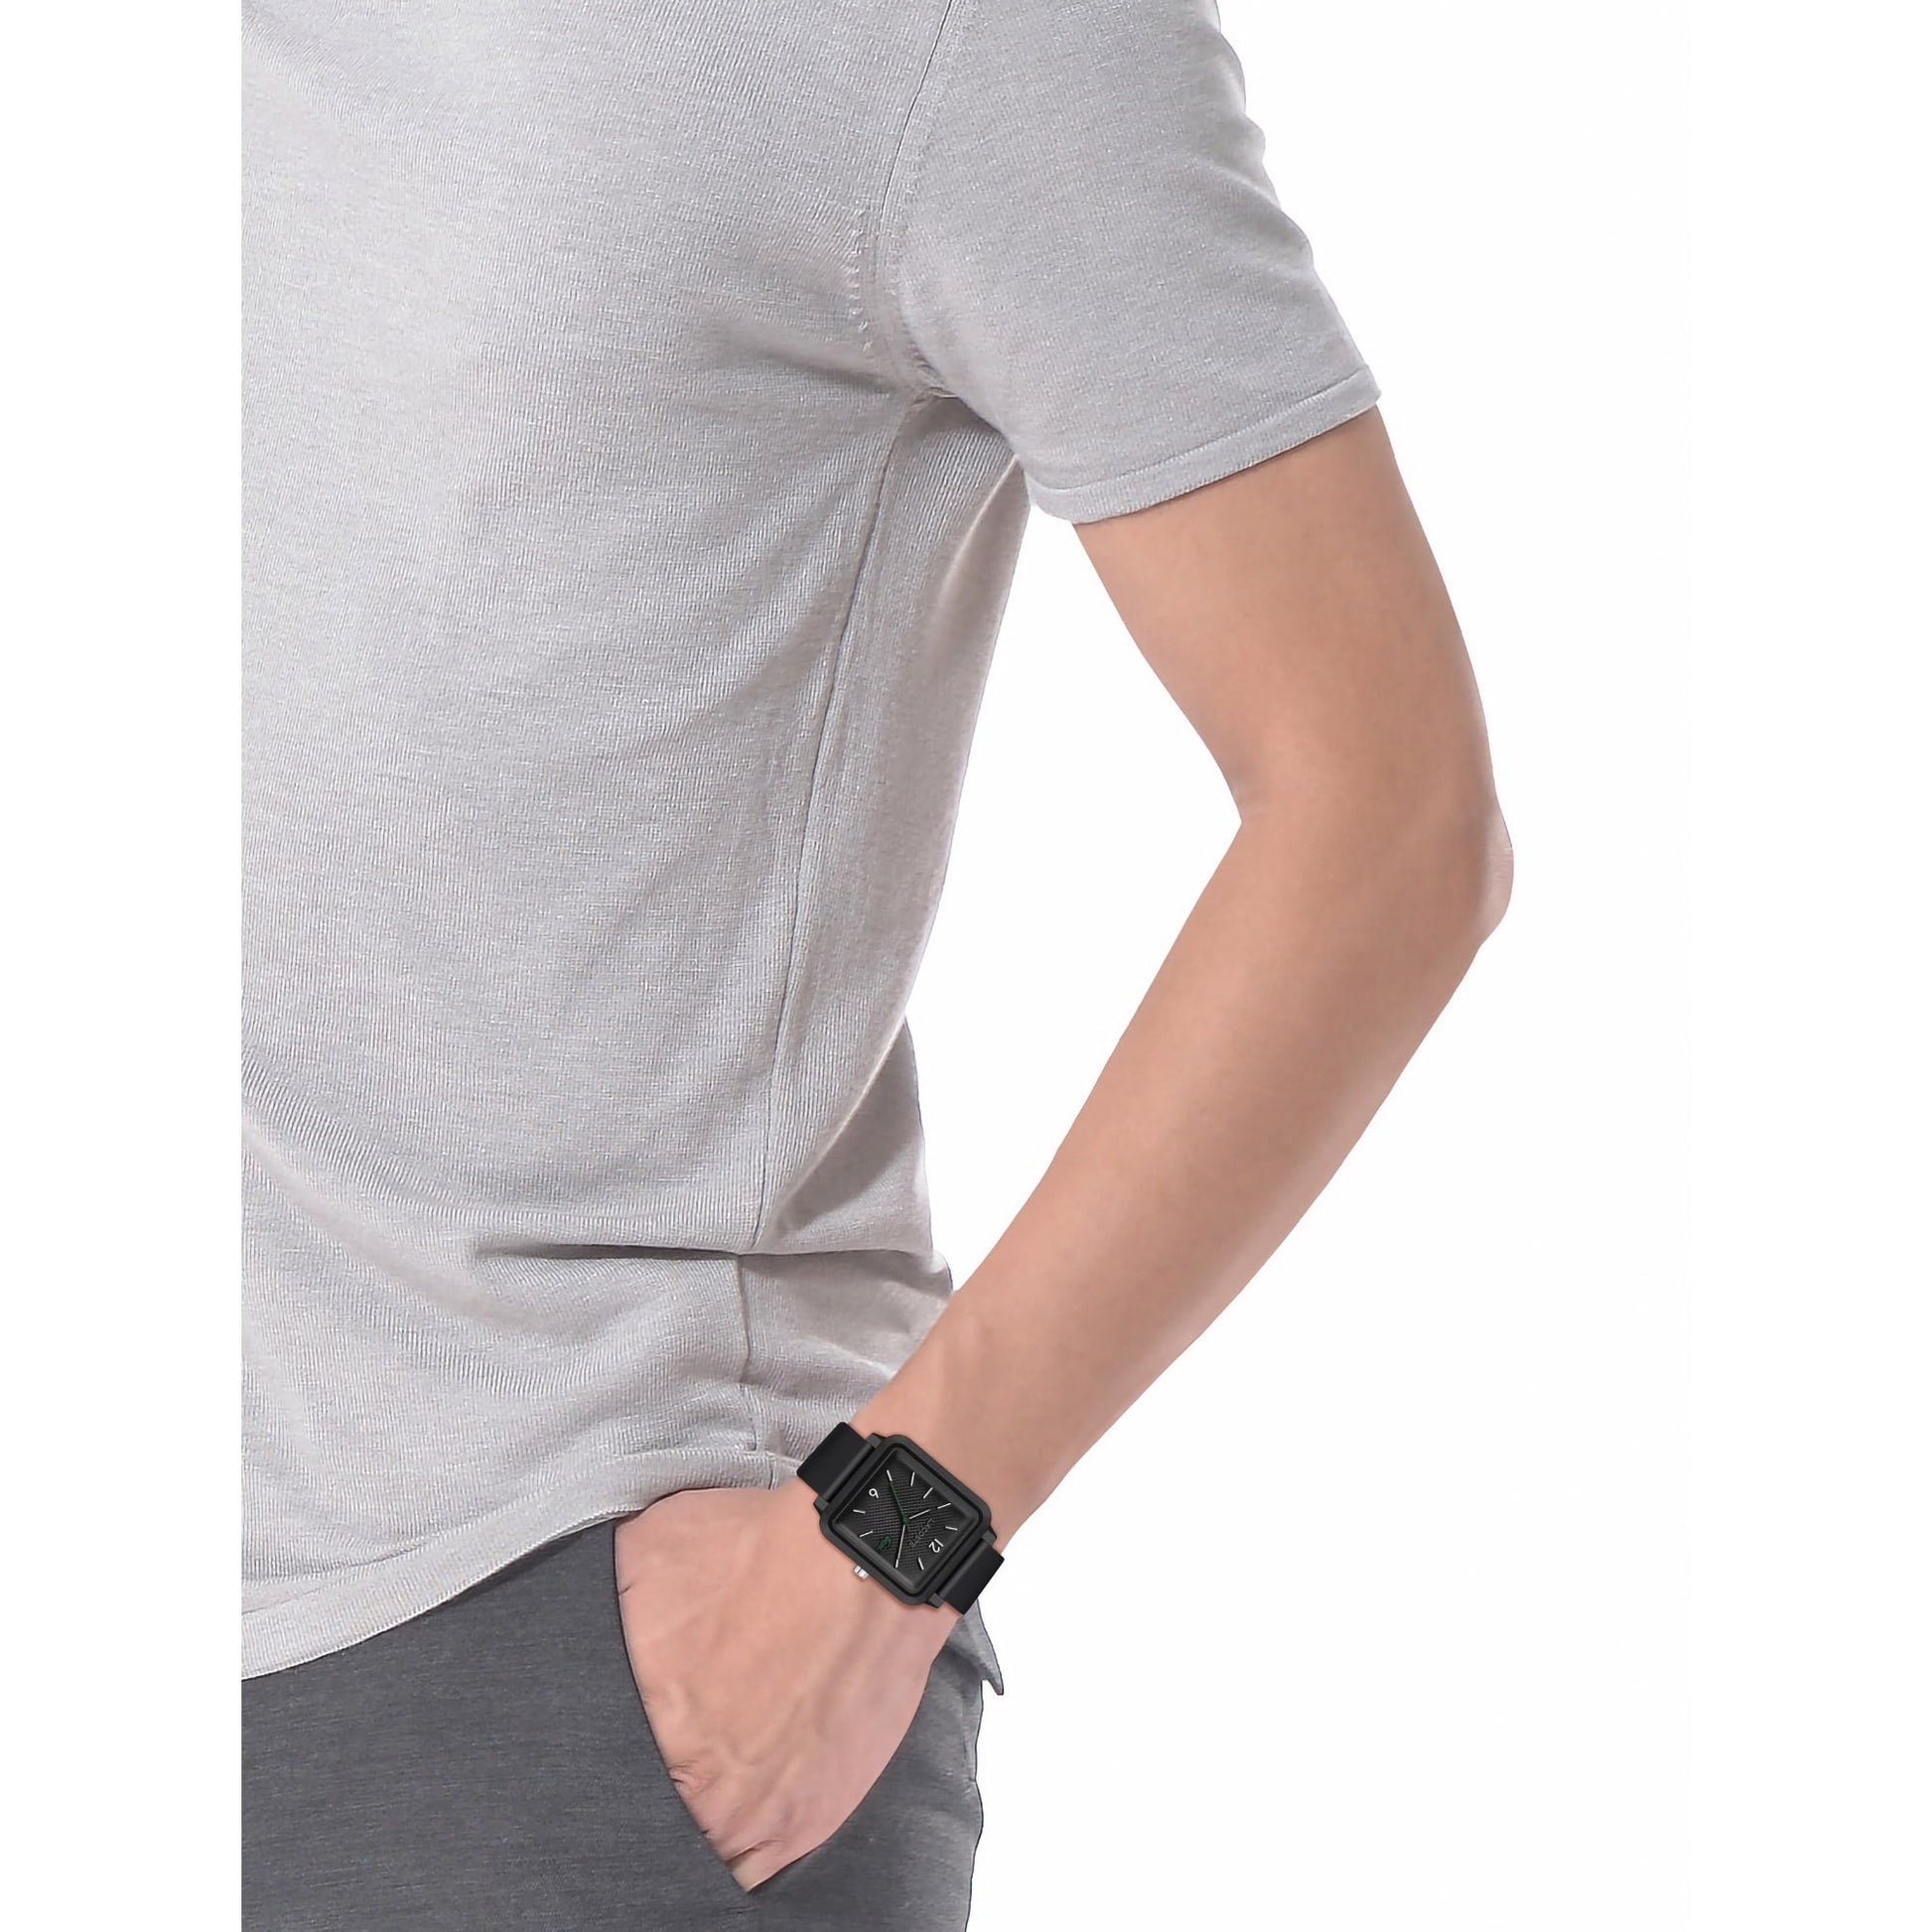 A man wearing a grey t-shirt and gray pants showcasing his Lacoste.12.12 Studio 3 Hands Watch Black Silicone in a Studio setting.